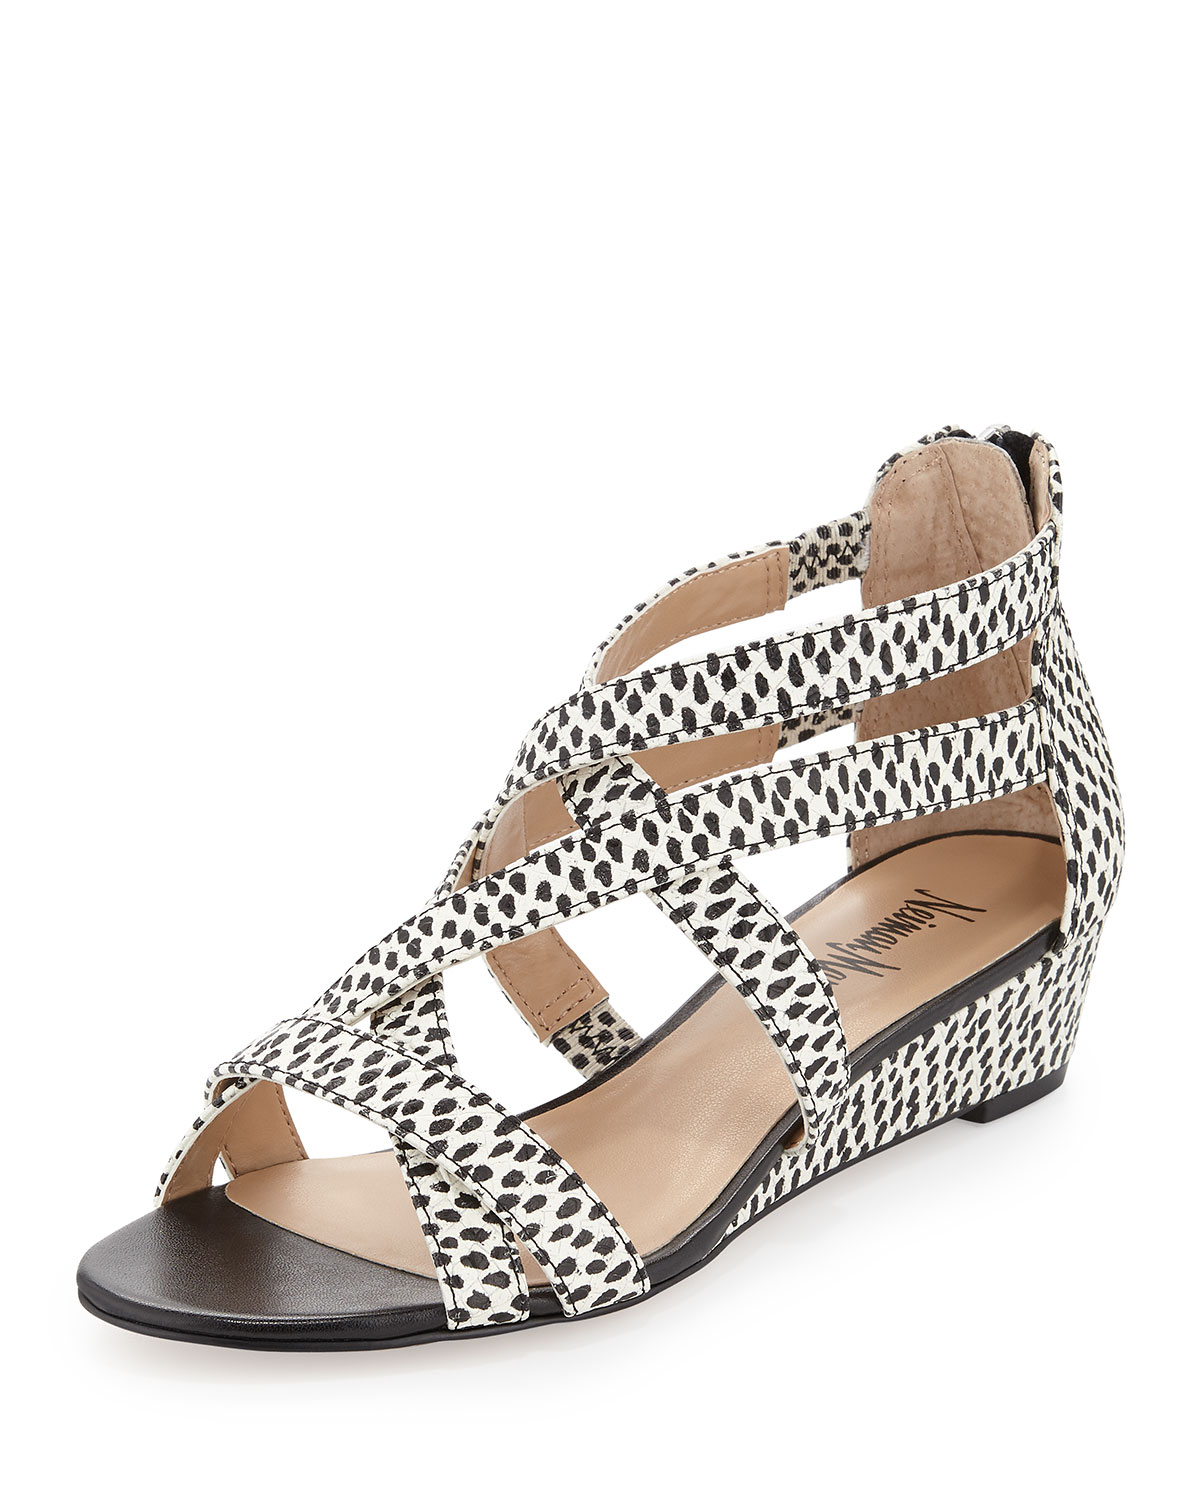 Lyst - Neiman Marcus Wisteria Strappy Leather Wedge Sandal in Black